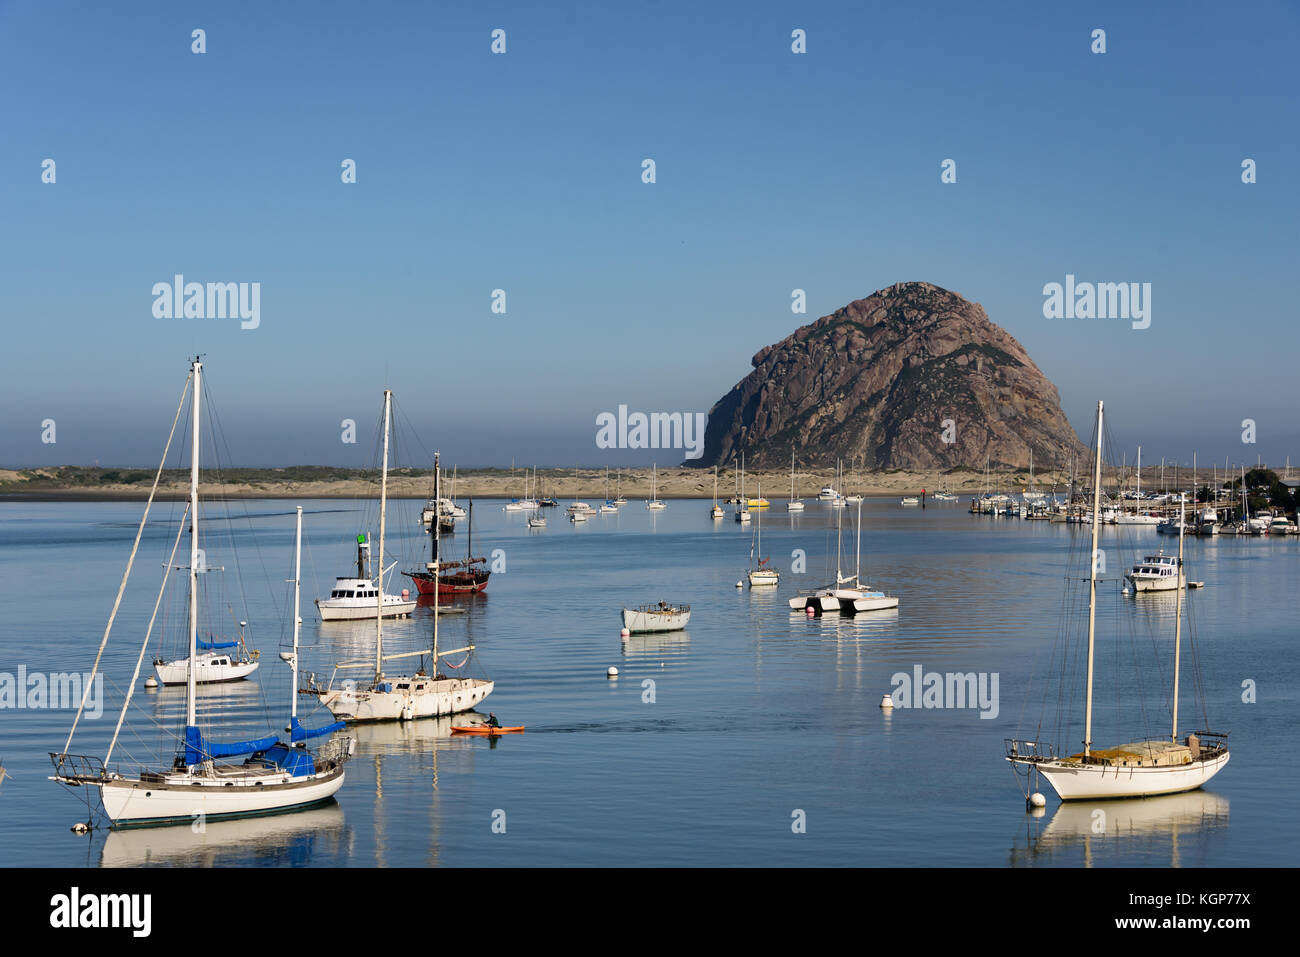 View of Morro Rock across Morro Bay with sail boats anchored across flat water, an orange kayak and kayaker pass between the boats on a clam morning. Stock Photo